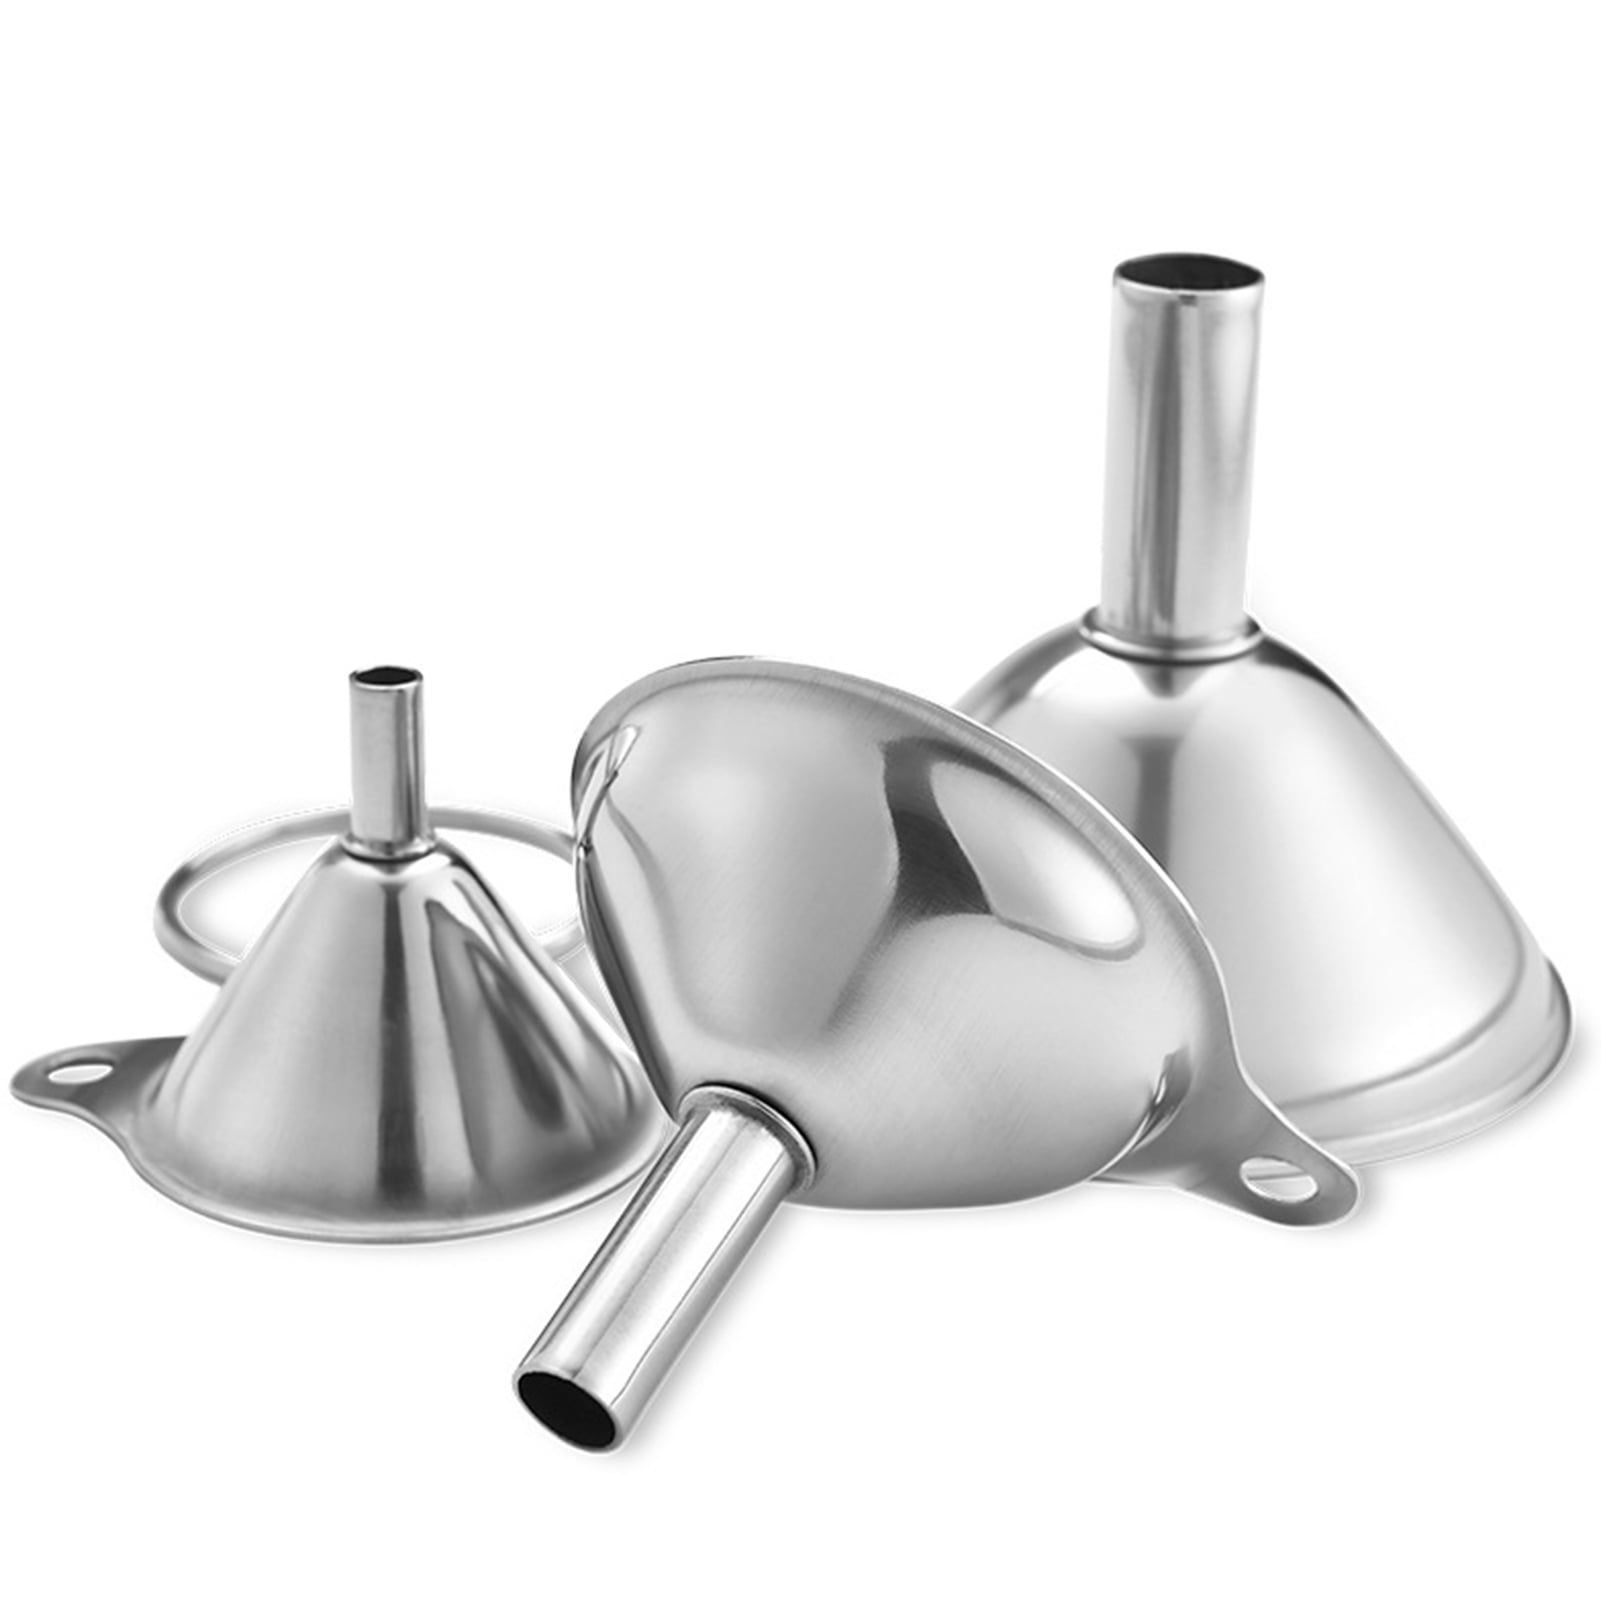 3pcs/set Stainless Steel Funnel Wide Mouth Kitchen Funnels With Handles Size S-L 